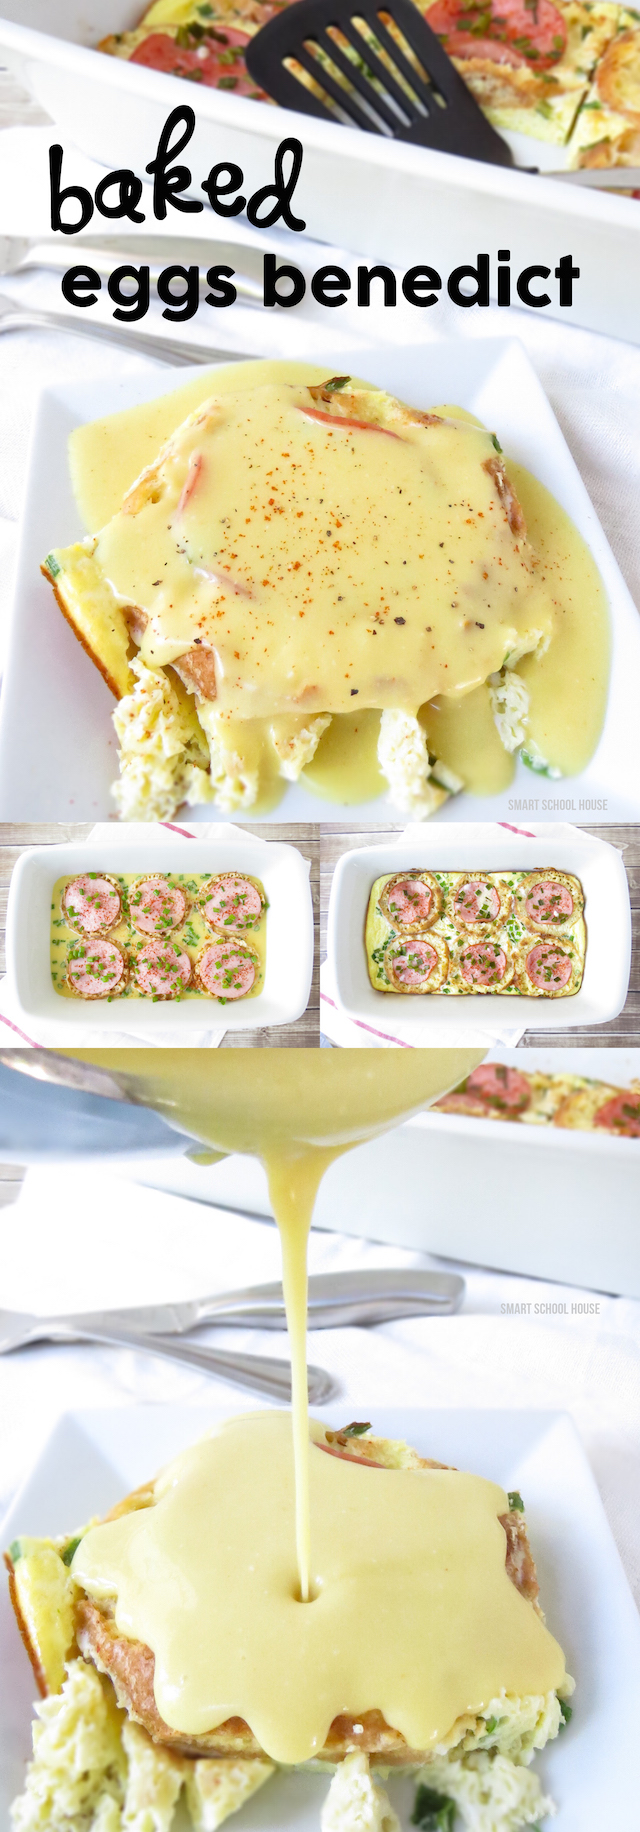 Baked Eggs Benedict recipe - This recipe is WAY EASIER than the traditional one. It's a great brunch or breakfast recipe for a group too...... I can't believe how SIMPLE this was to make! My entire family loved it and it made leftovers that we ate the next day